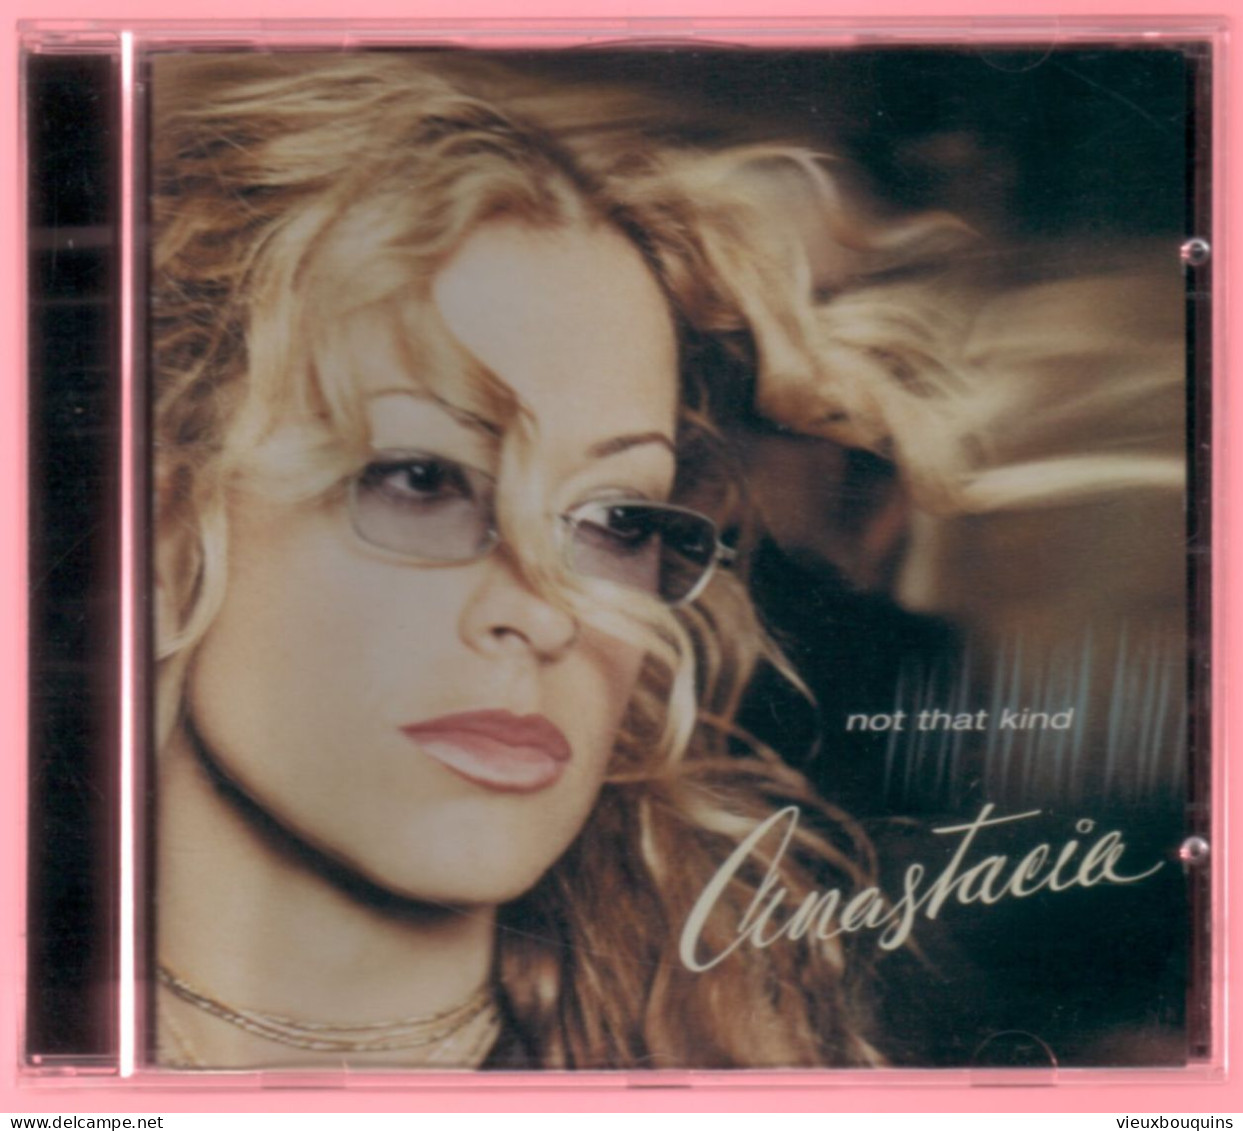 ANASTACIA : NOT THAT KIND - Other - English Music